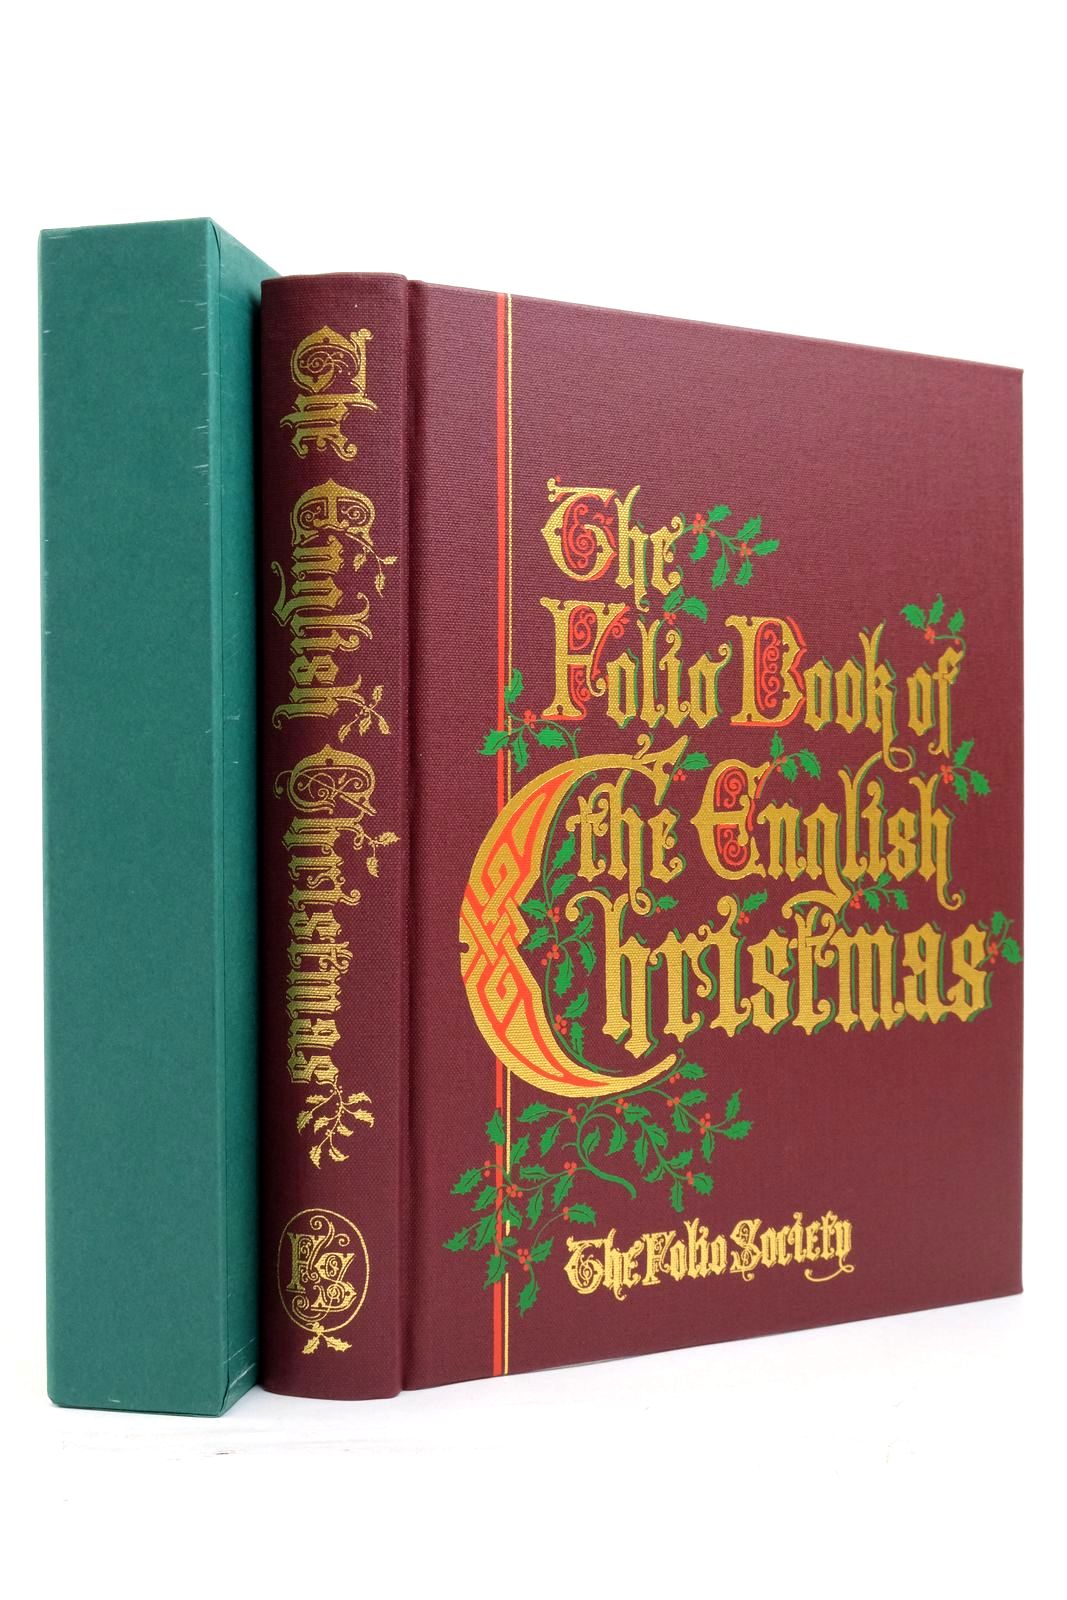 Photo of THE FOLIO BOOK OF THE ENGLISH CHRISTMAS written by Beare, Geraldine
Lees, Edwin
Lee, Laurie
Farjeon, Eleanor
Grahame, Kenneth
James, Henry
Eliot, George
Dickens, Charles
Beaton, Cecil
et al,  illustrated by Holder, John published by Folio Society (STOCK CODE: 2138225)  for sale by Stella & Rose's Books